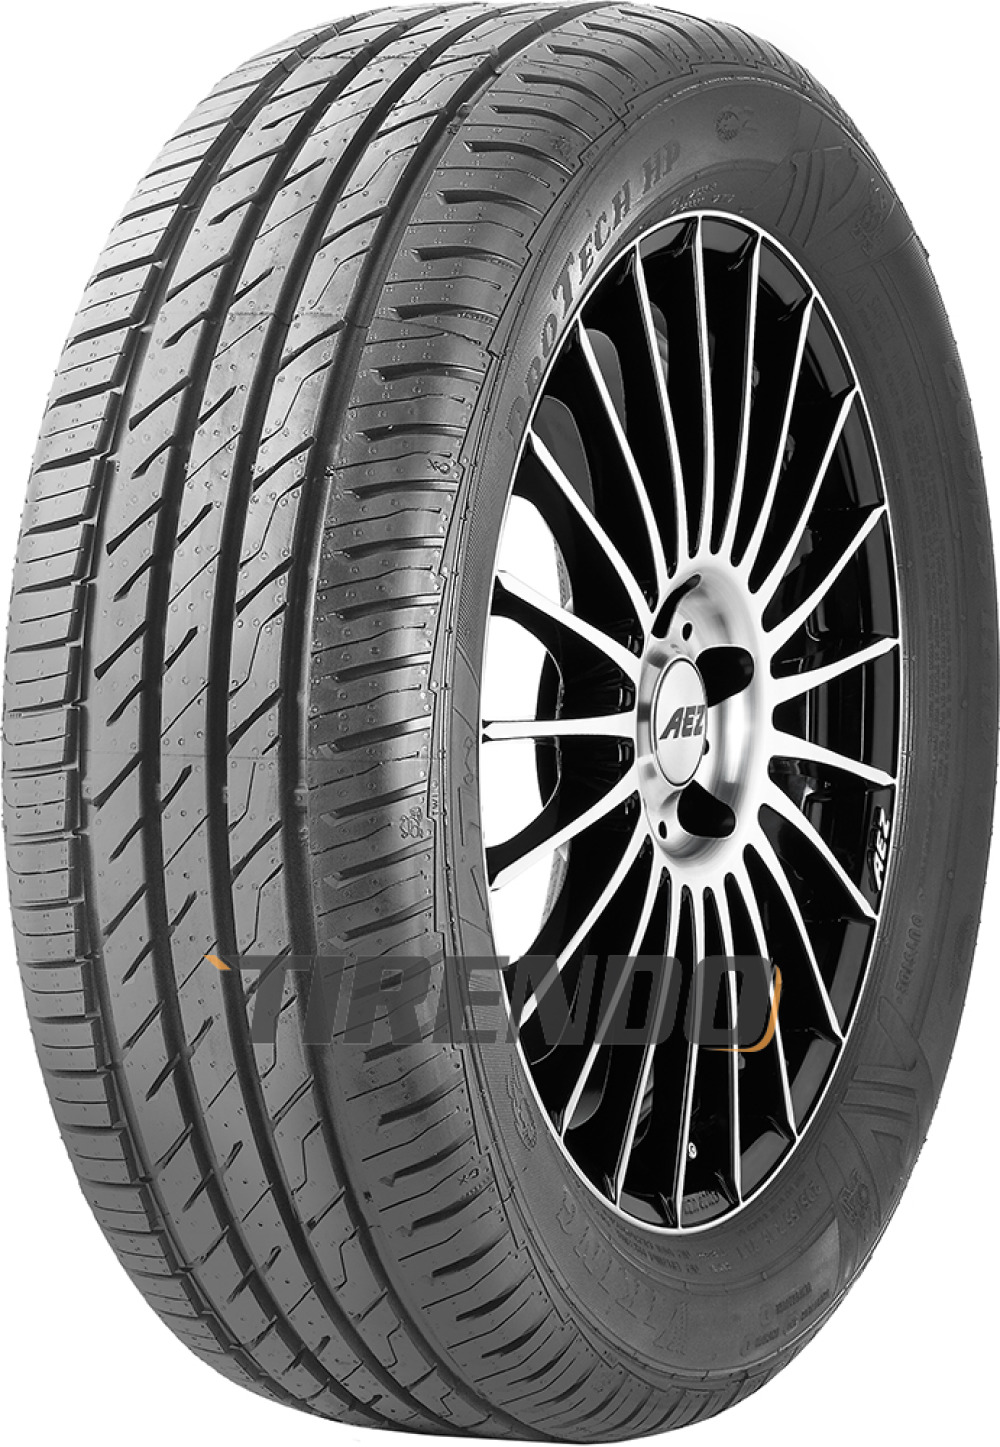 Image of Viking ProTech HP ( 245/40 R17 91Y )